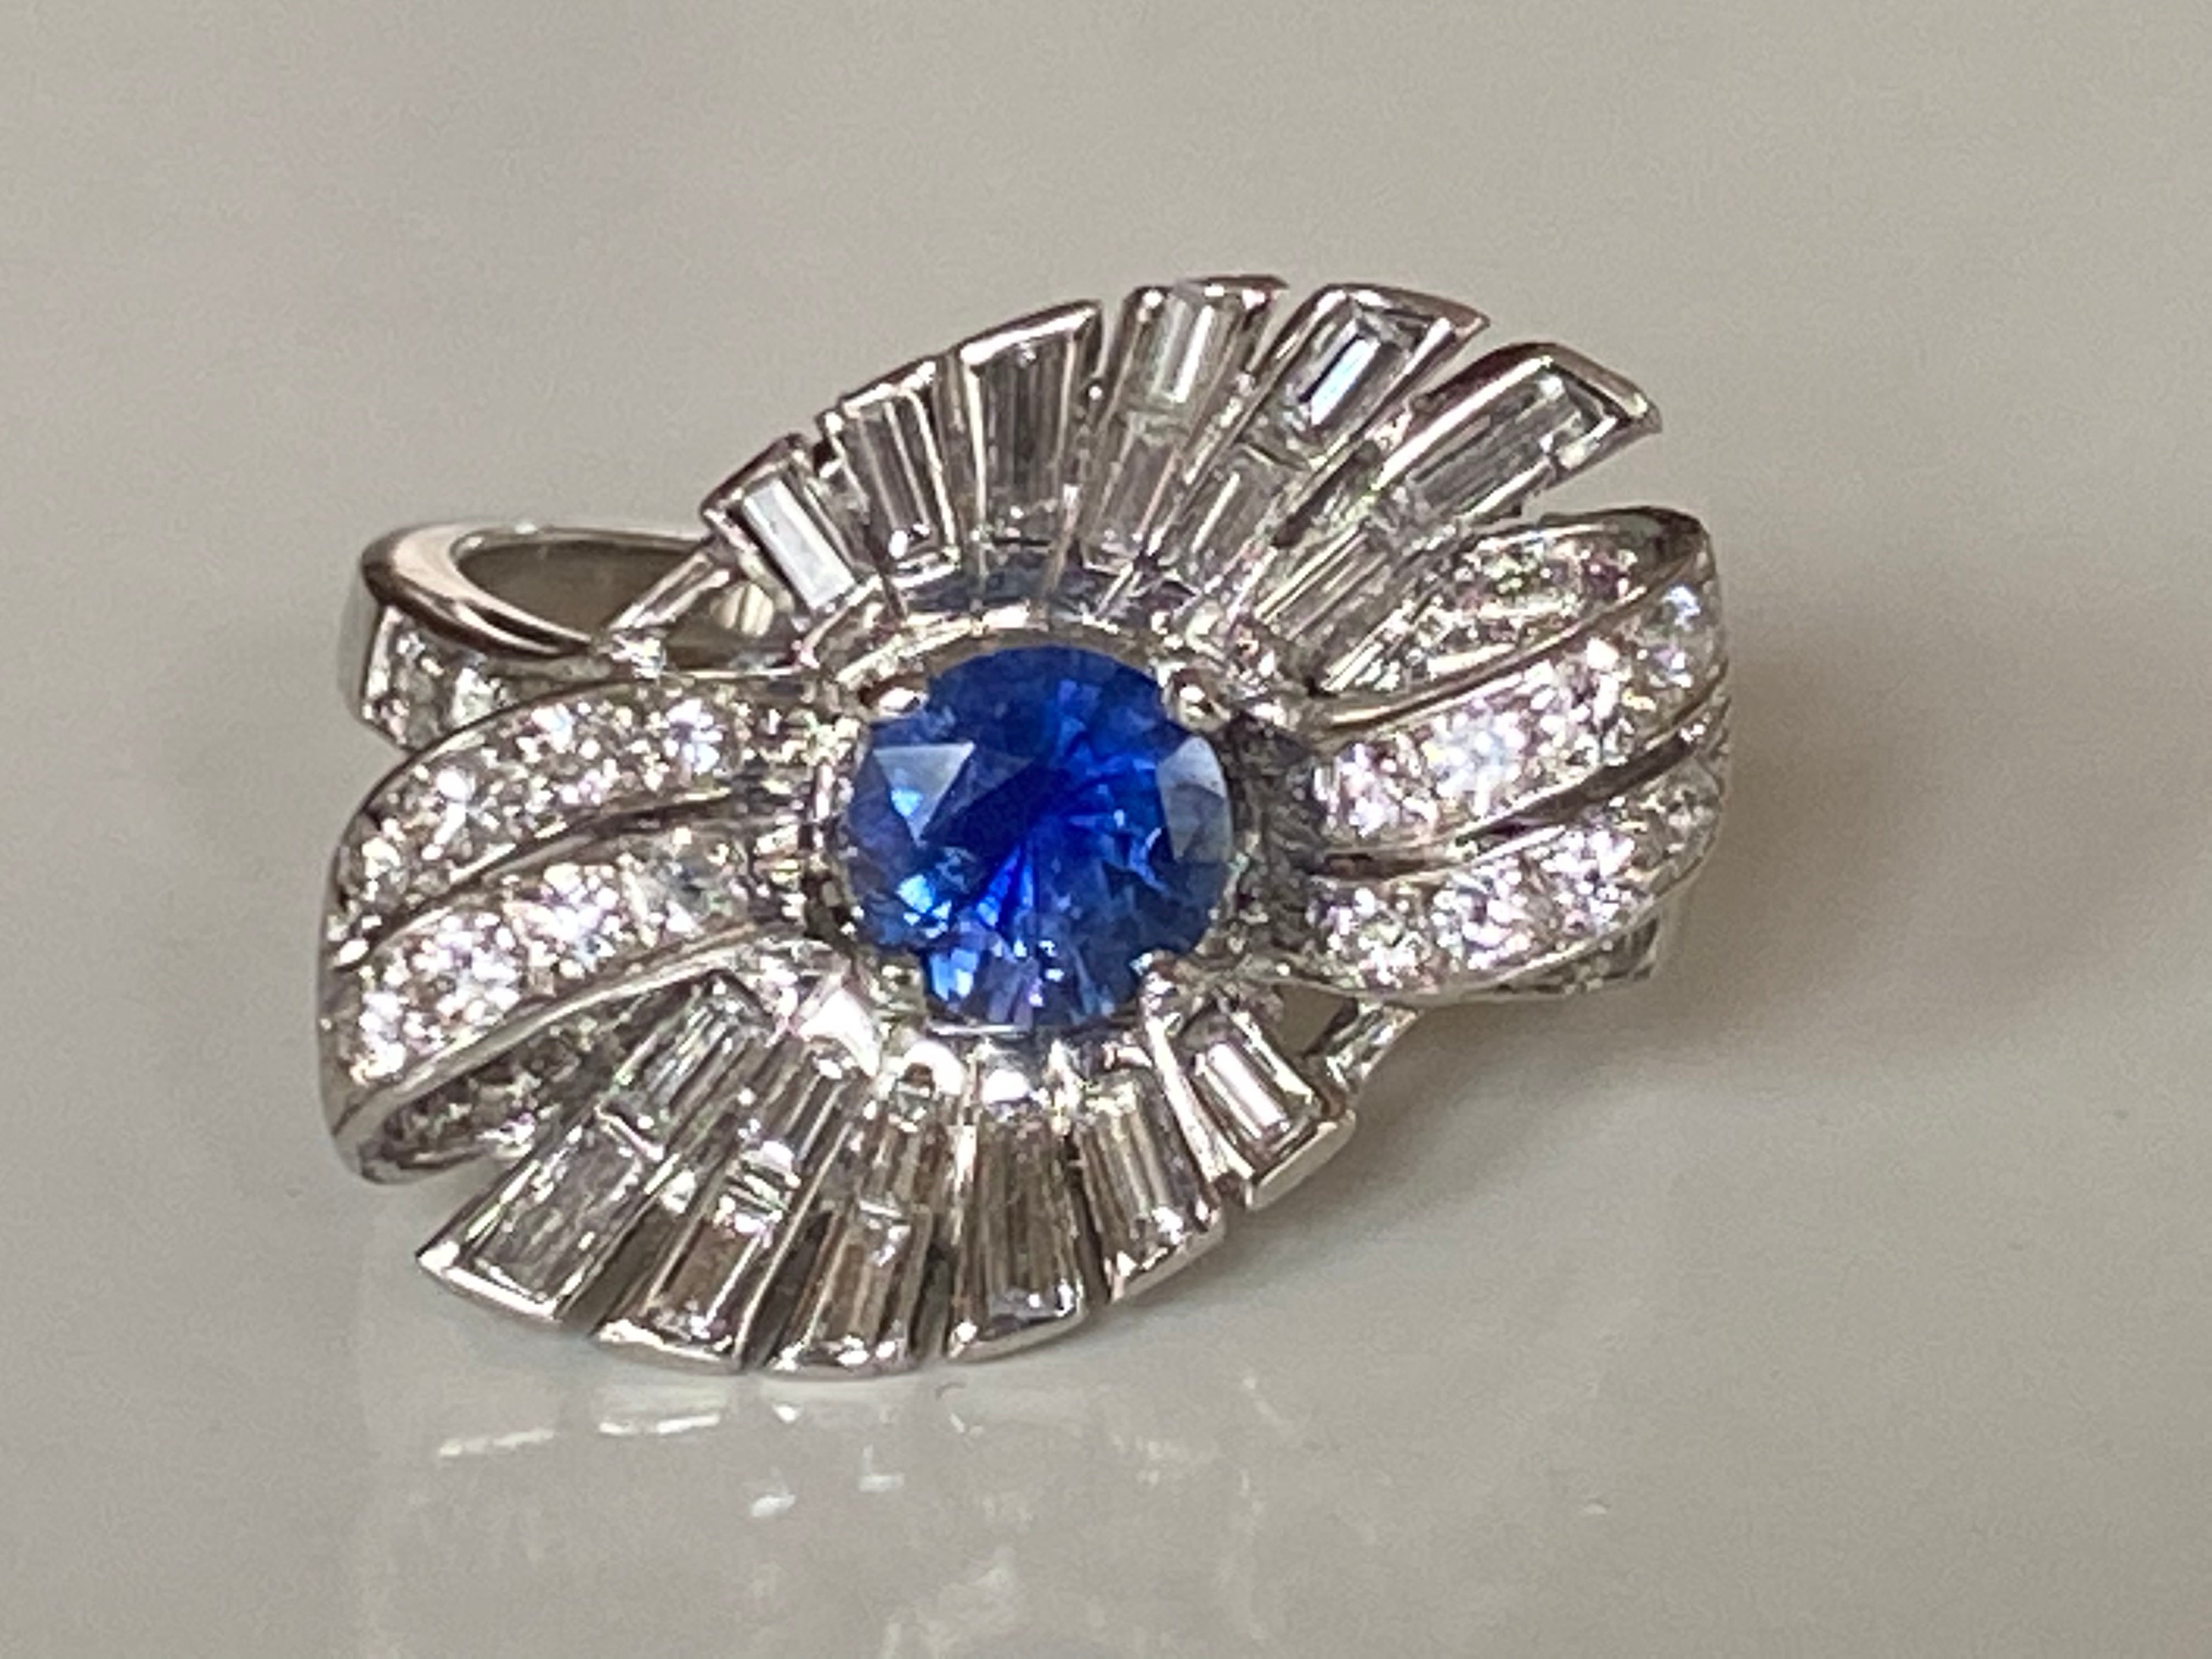 This bold vintage cocktail ring features two ribbons of round-brilliant diamonds and baguette diamonds fanned out around a natural royal blue round sapphire center stone handcrafted in platinum. The diamonds total approximately 2.00 carats. 


